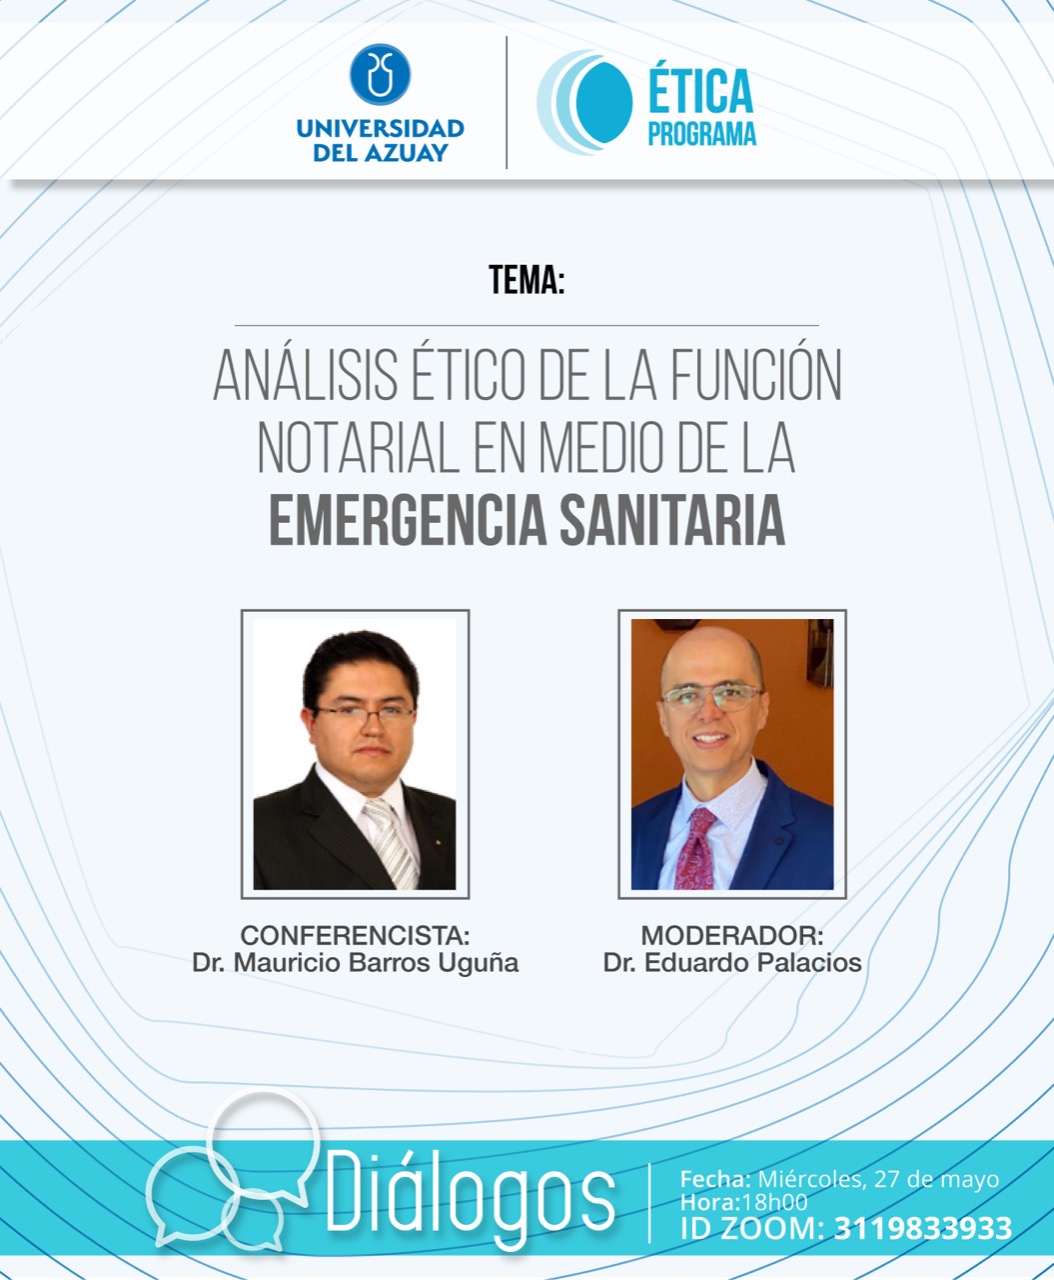 Ethical Analysis of Notarial Function in the midst of the Health Emergency